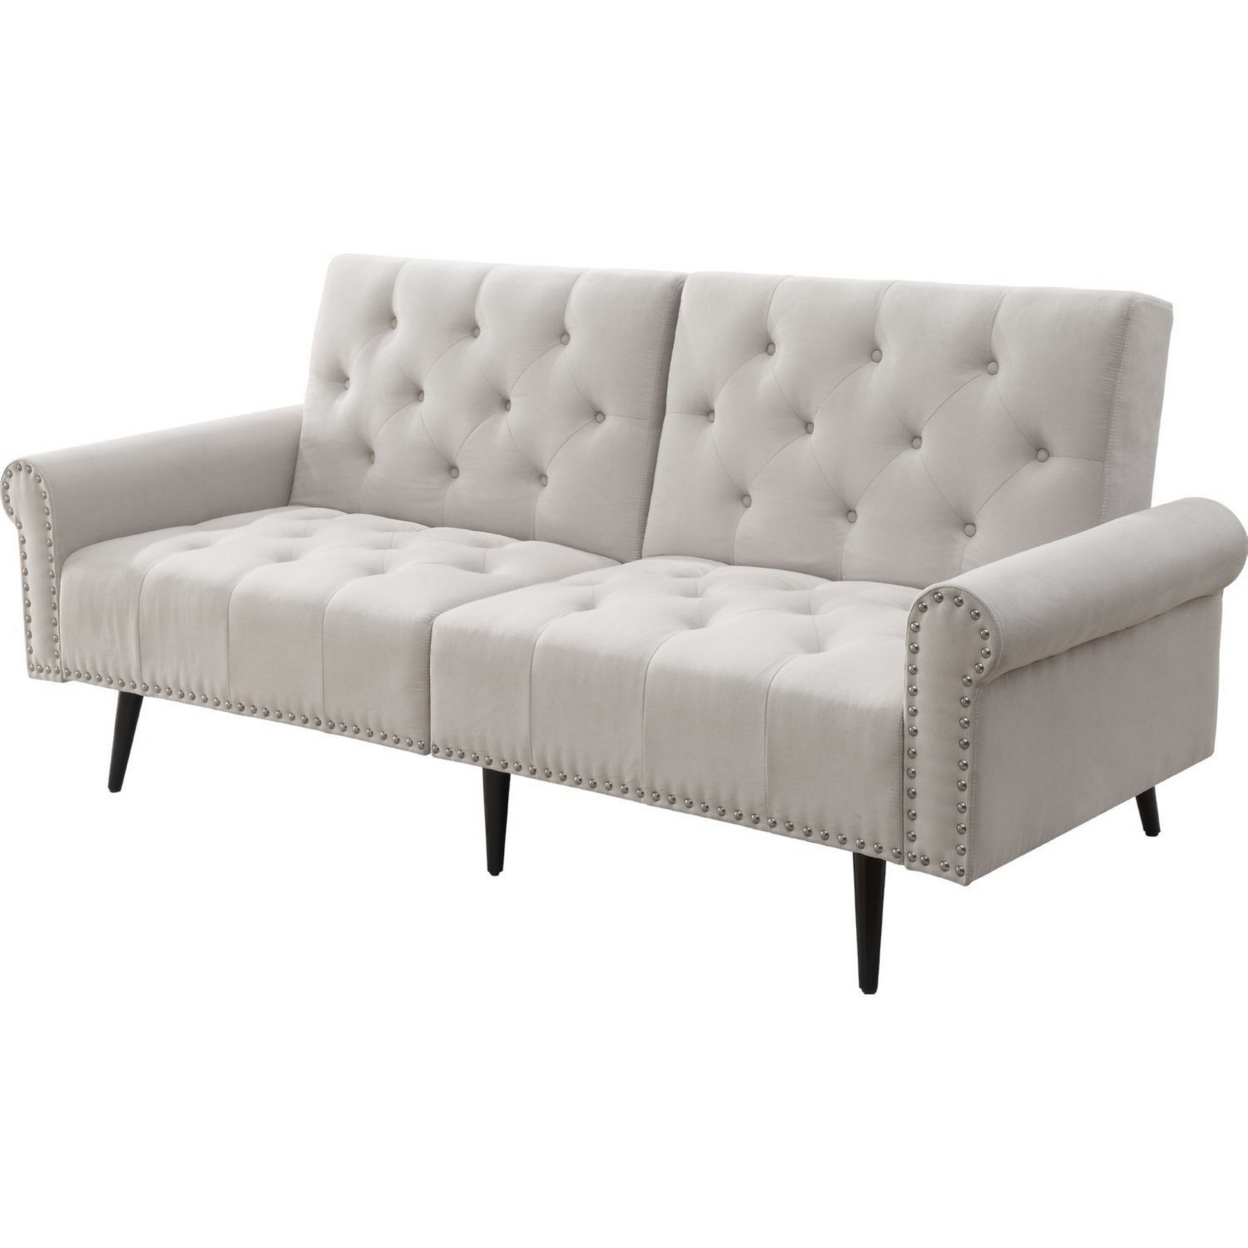 Adjustable Sofa With Button Tufting And Rolled Arms, White- Saltoro Sherpi